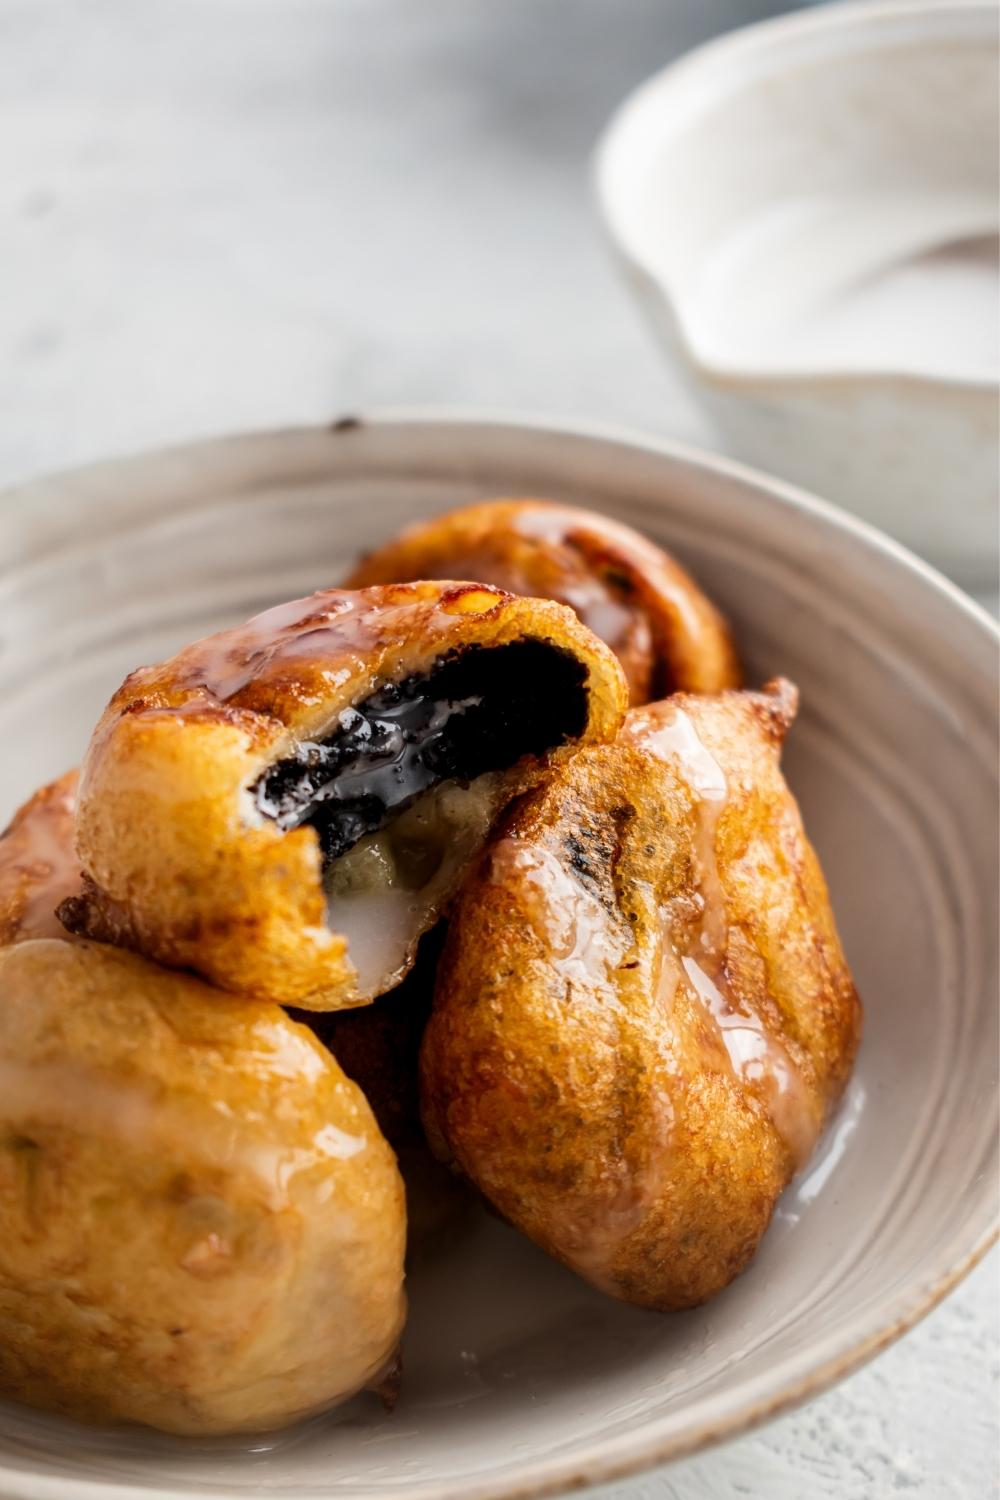 A pile of glazed fried Oreos in a ceramic bowl on the counter top. The top fried Oreo has a bite out of it.